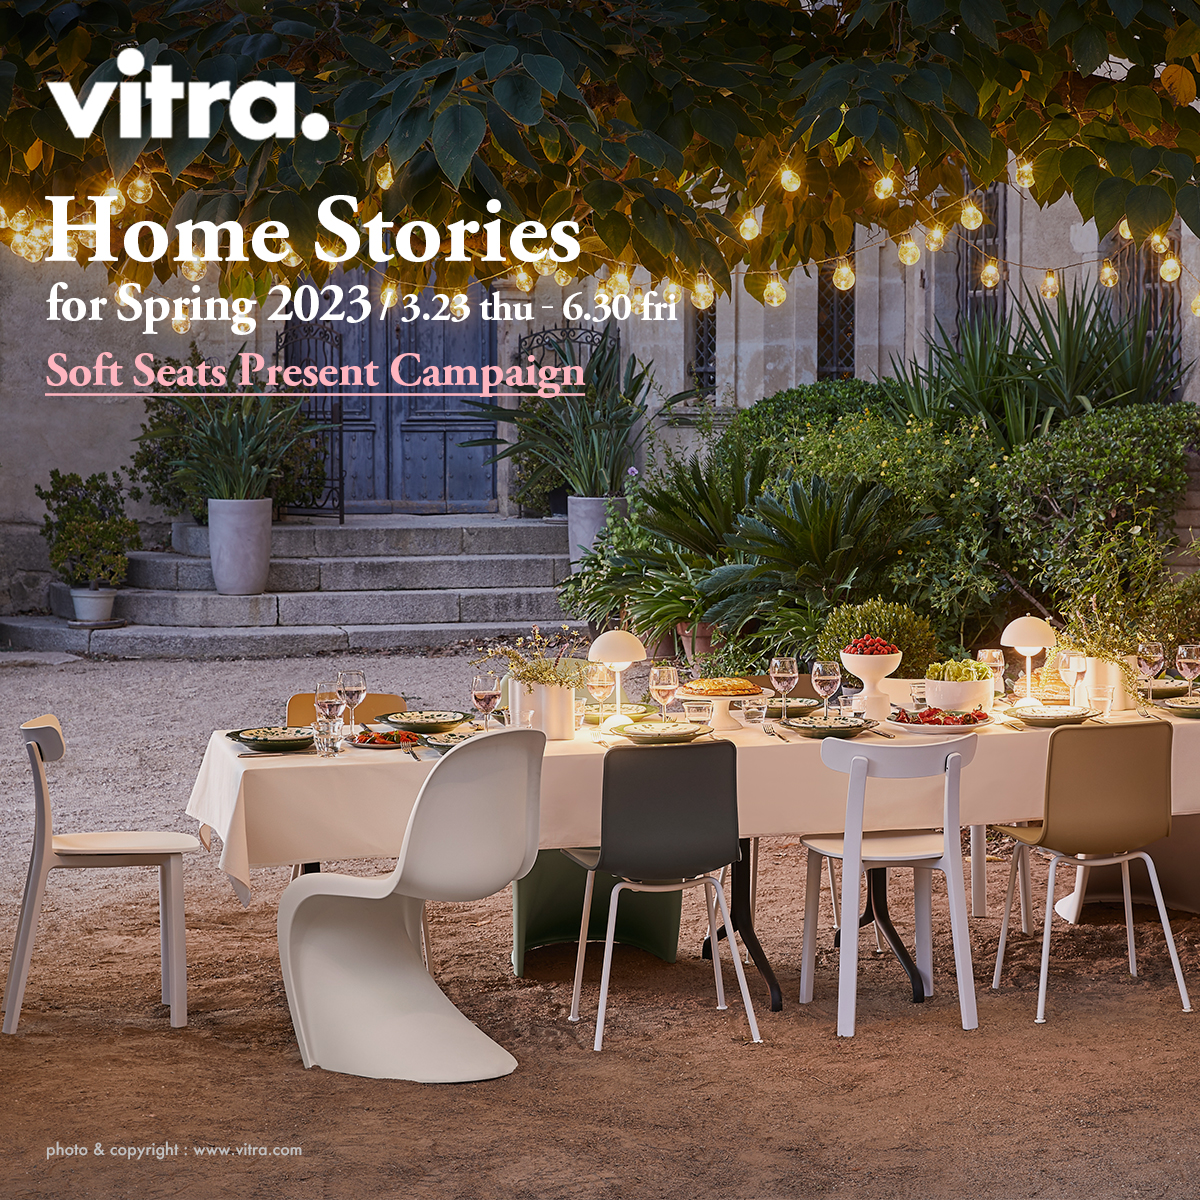 Vitra Home Stories for Spring 2023 シートクッション プレゼント キャンペーン